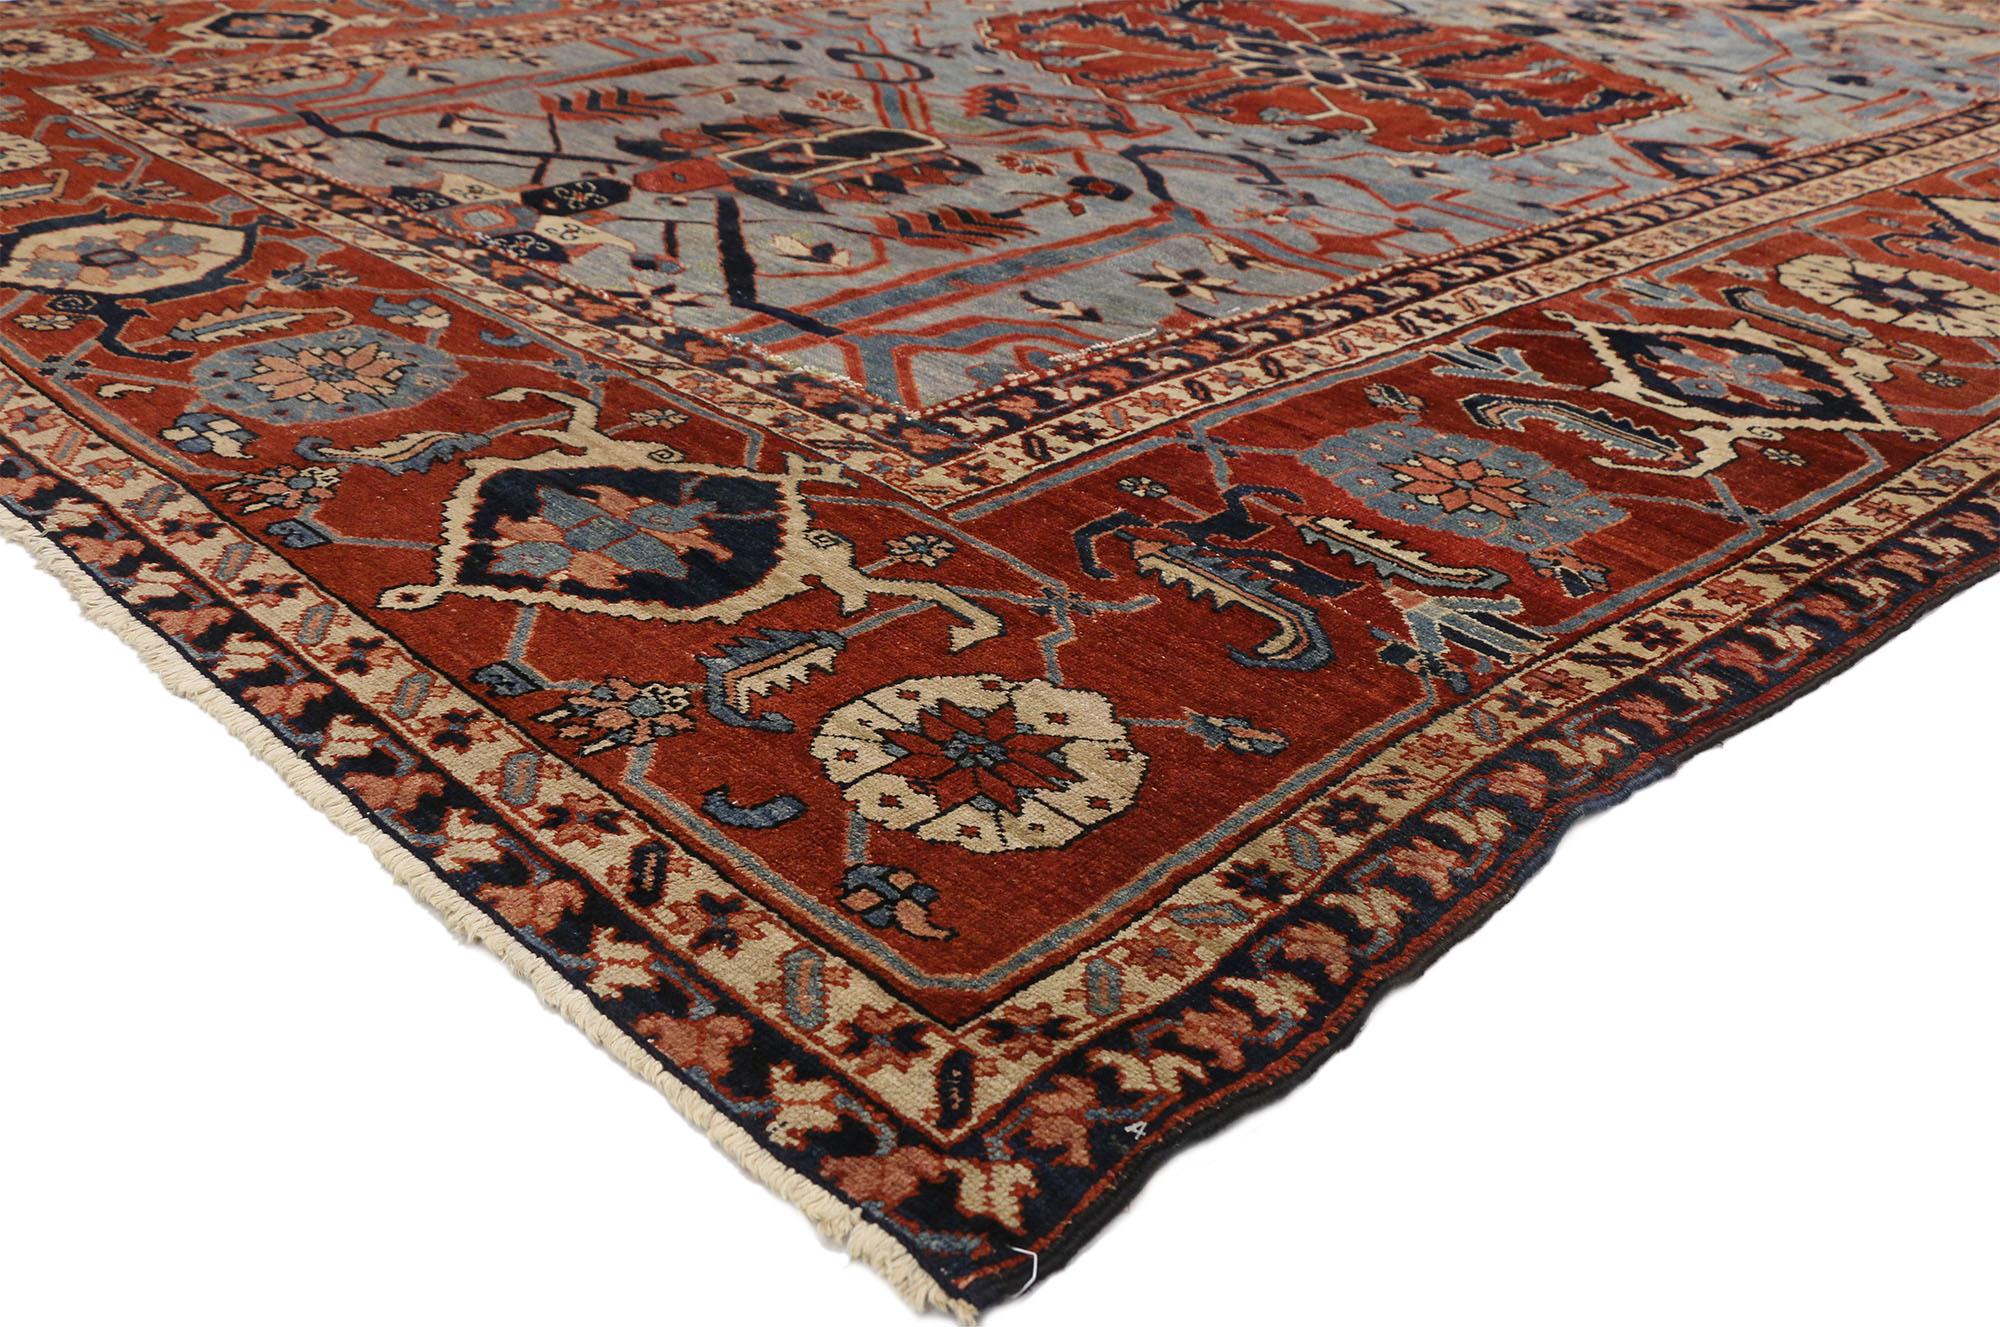 74059 Antique Persian Serapi Rug 09'02 X 13'06.
Ivy league style meets nomadic charm in this antique Persian Serapi rug. The intrinsic tribal design and sophisticated colors woven into this piece work together creating a relaxed yet elevated feel